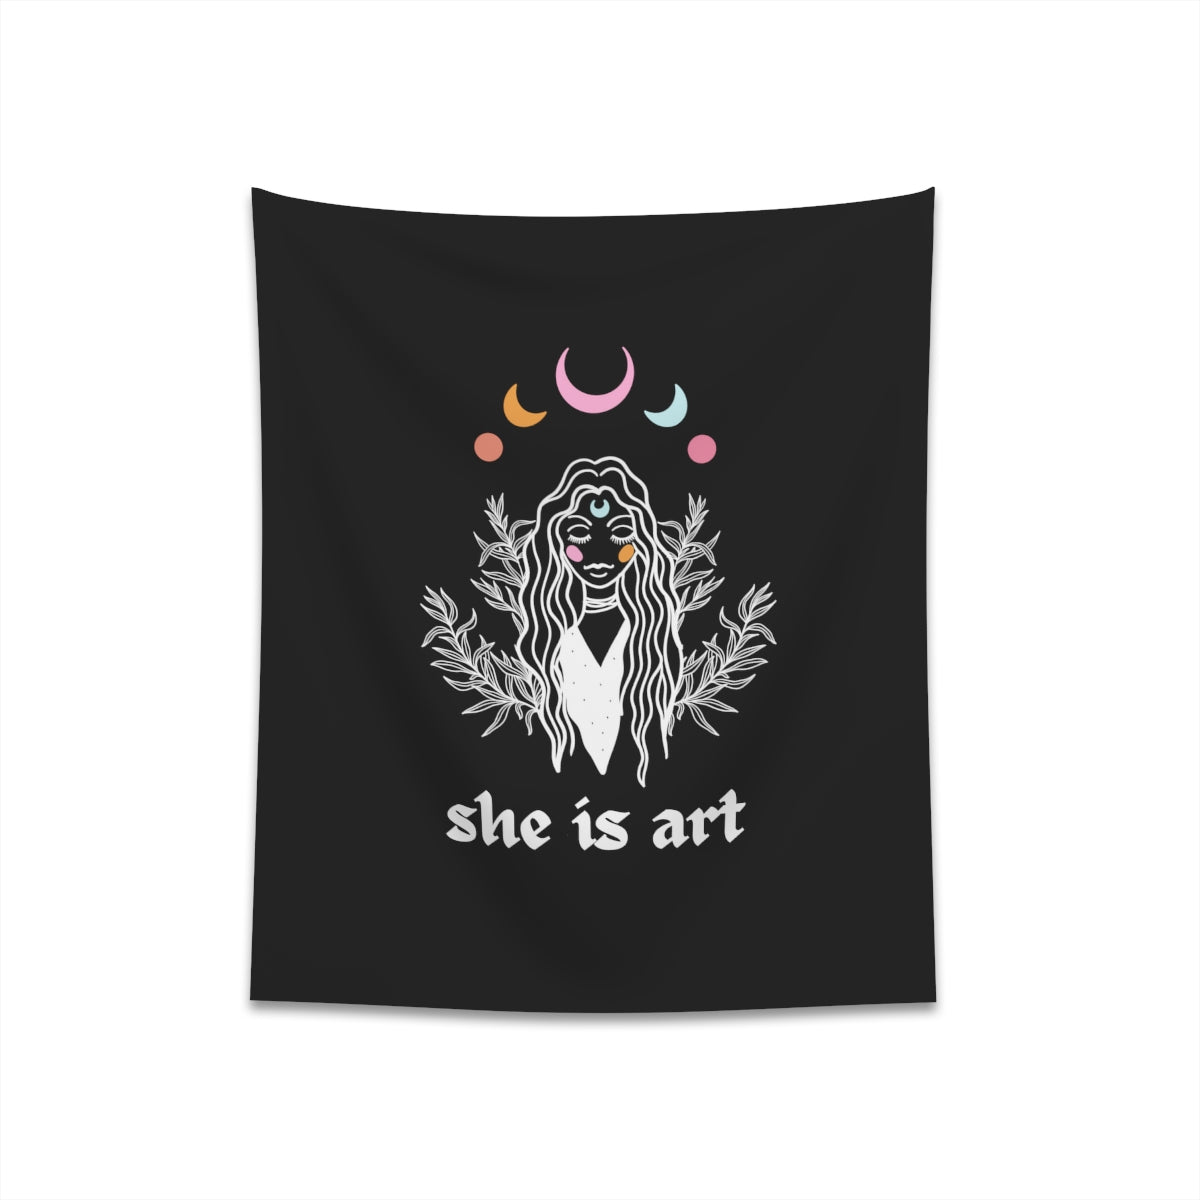 She is Art Wall Tapestry